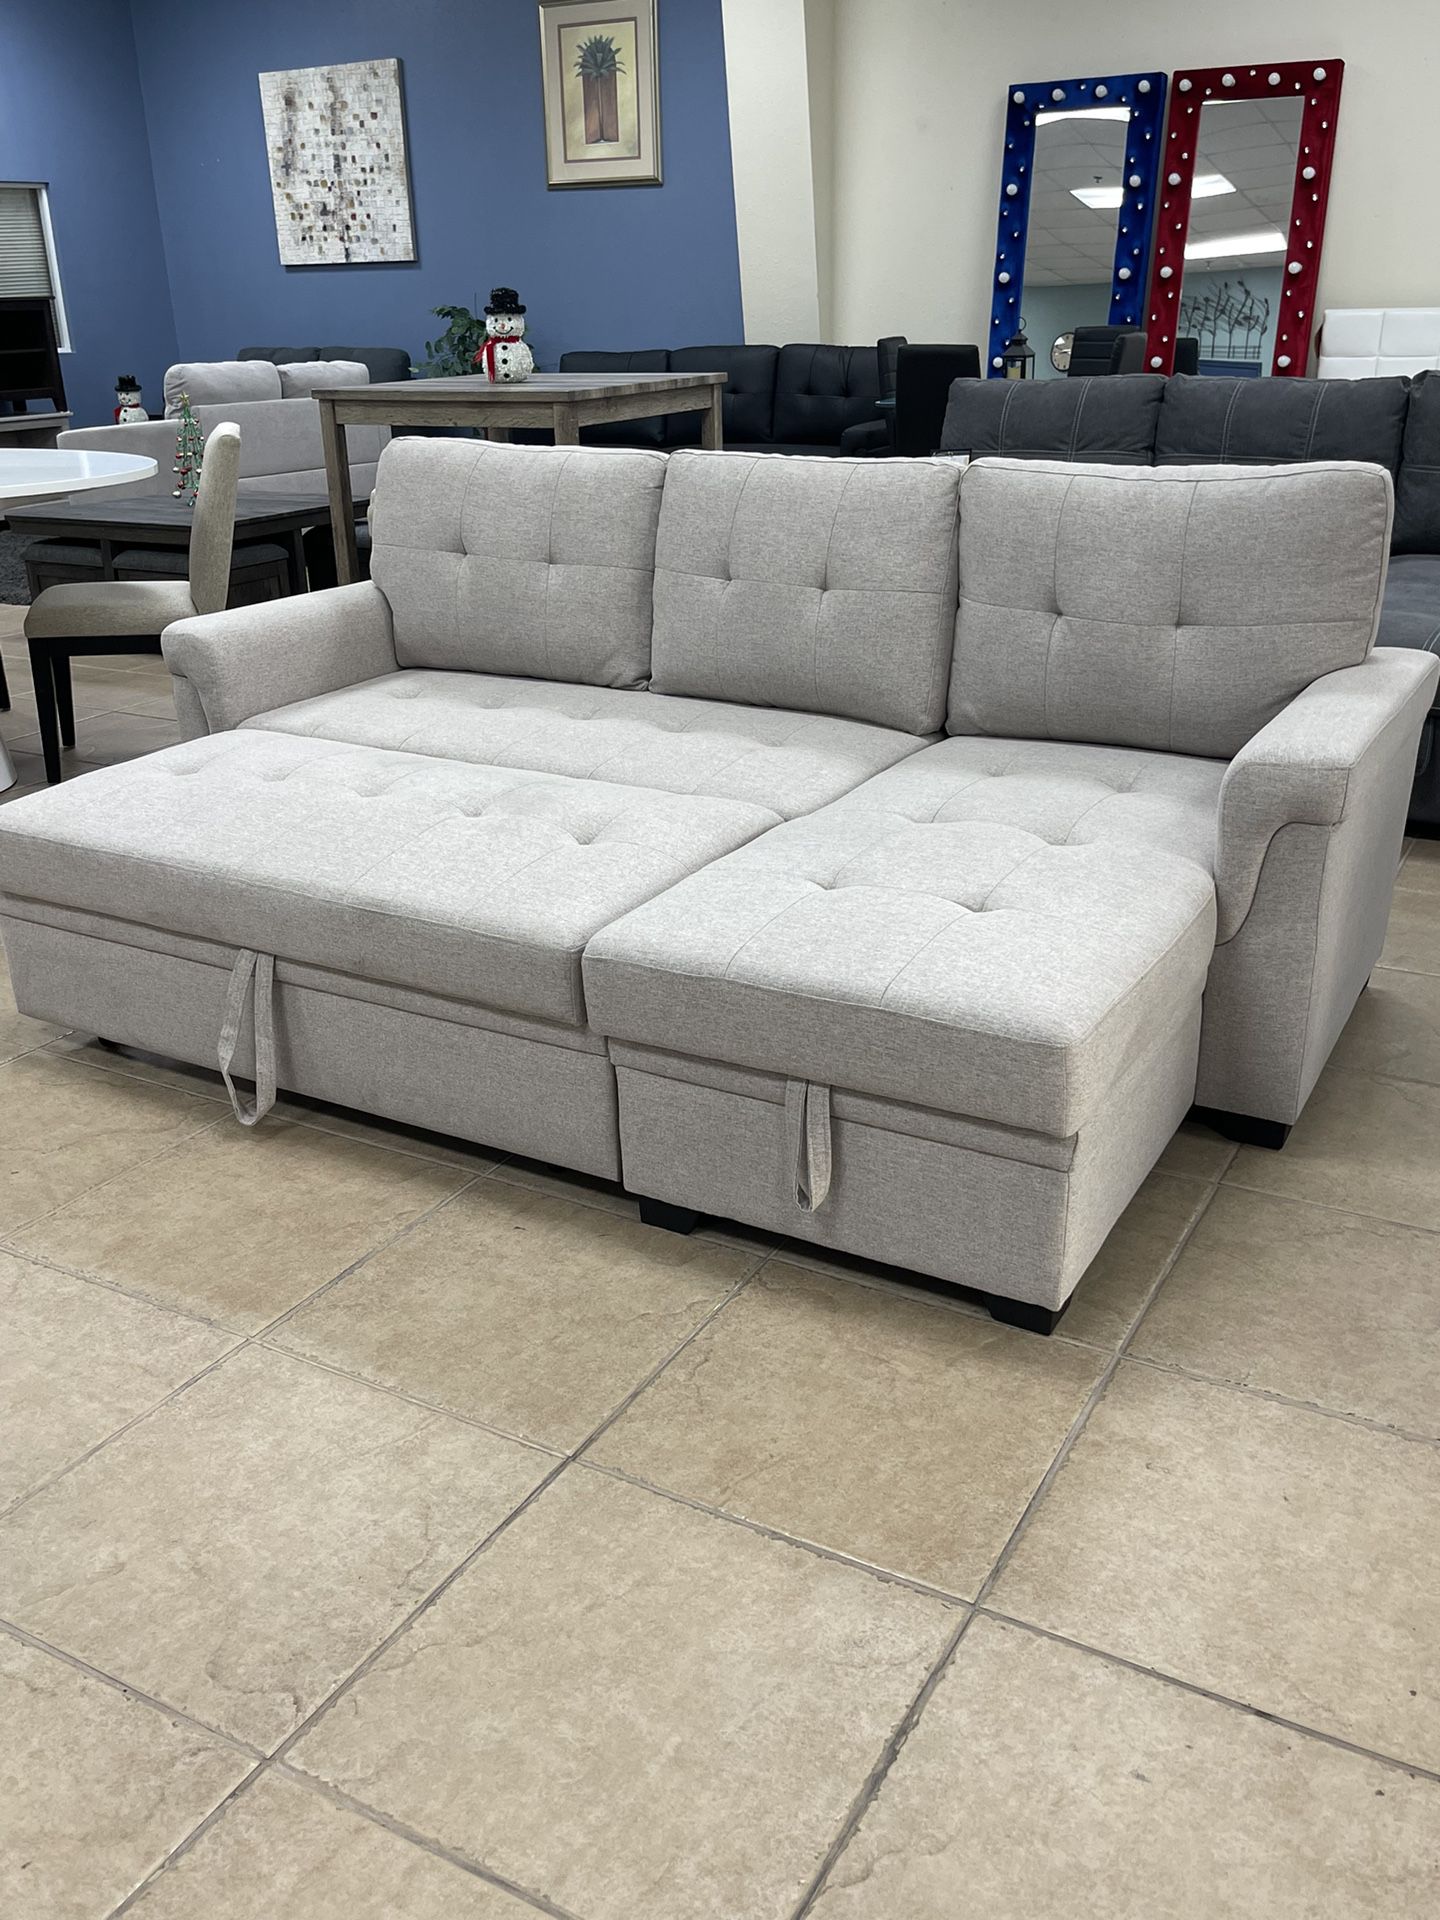 New Light Gray Sectional Sofa Couch Sleeper 